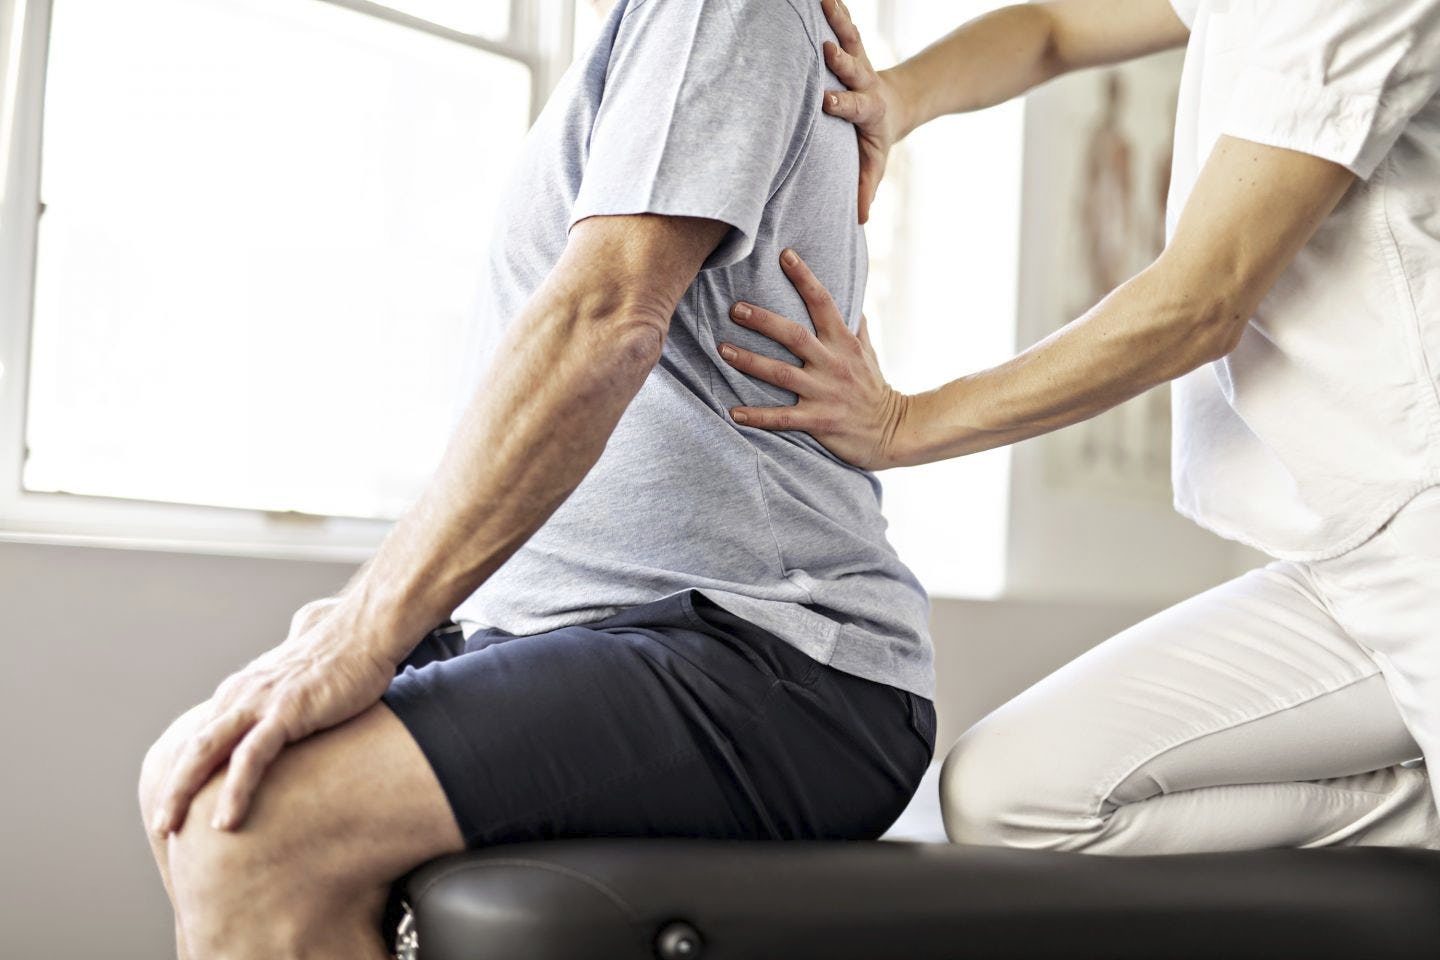 Low Back Pain - Impact Physical Therapy